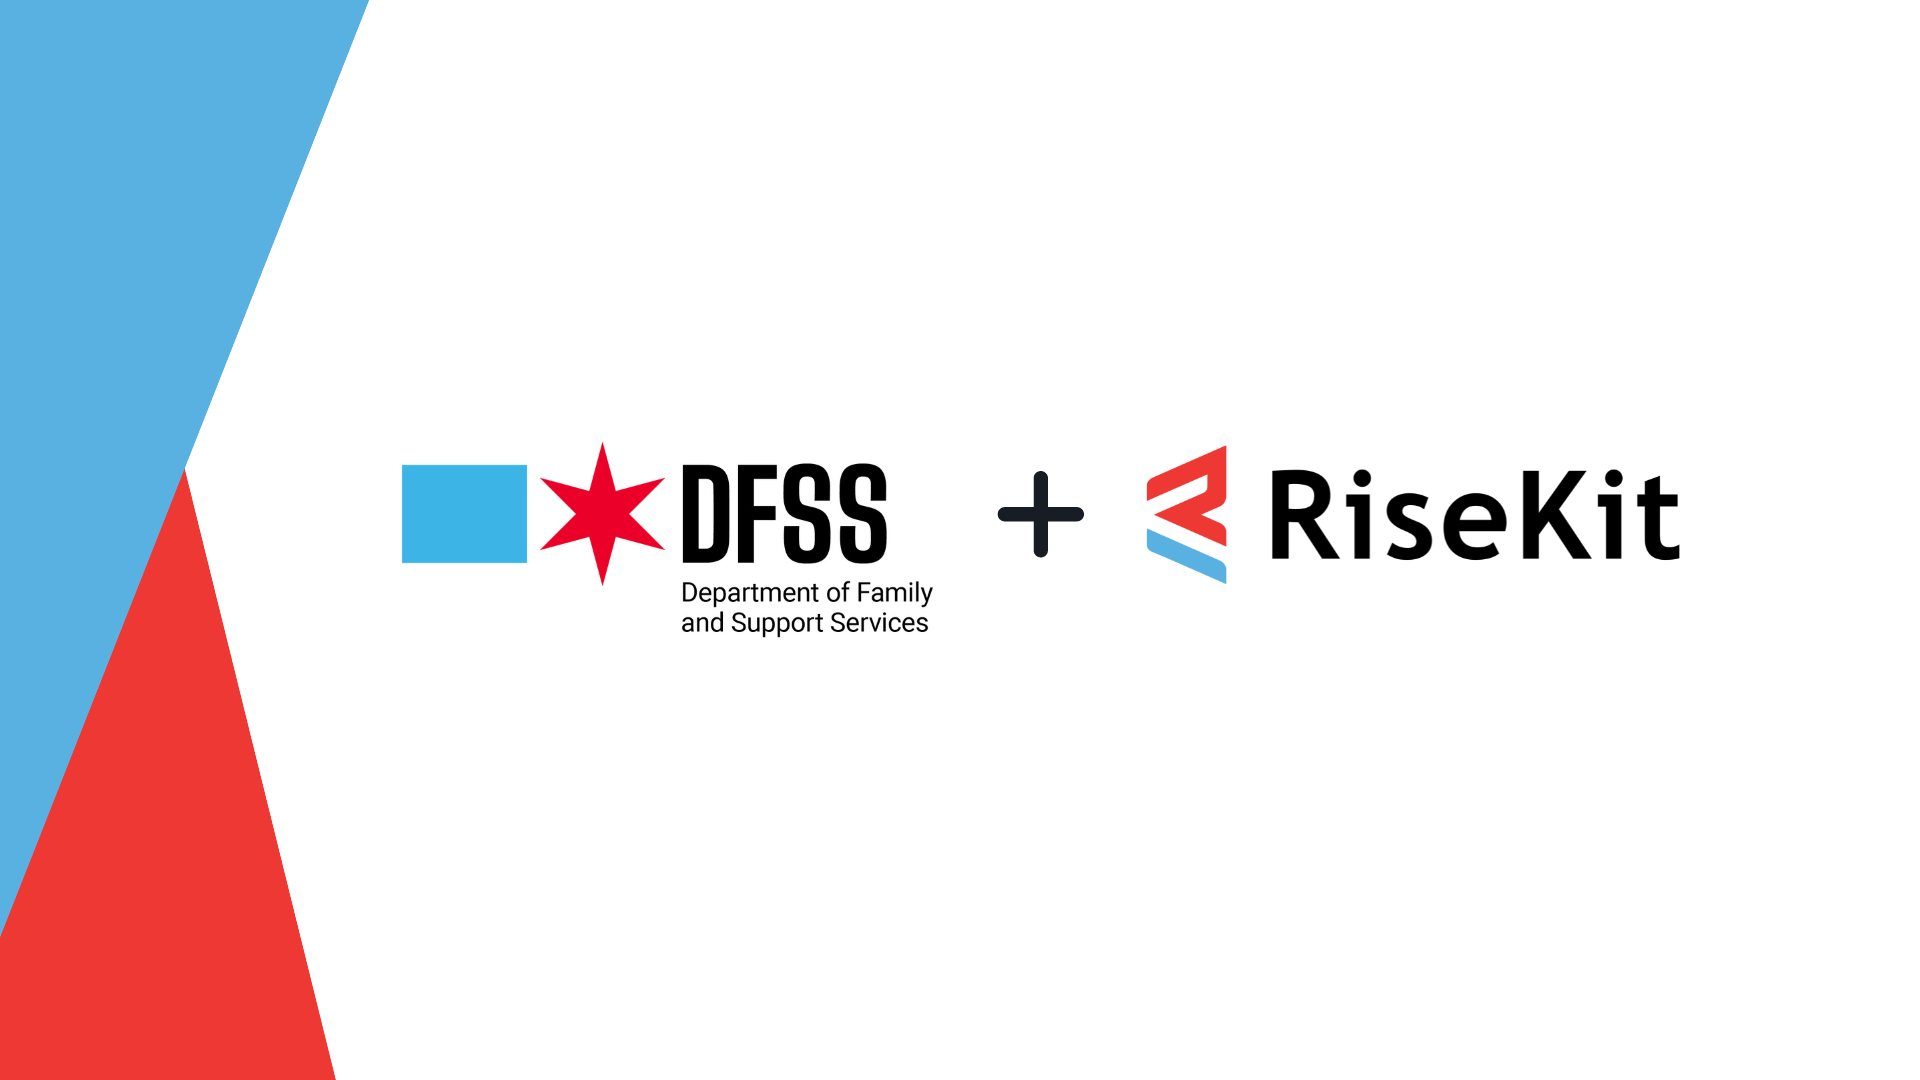 DFSS and RiseKit logos separated by plus sign with blue and red triangles on the left side